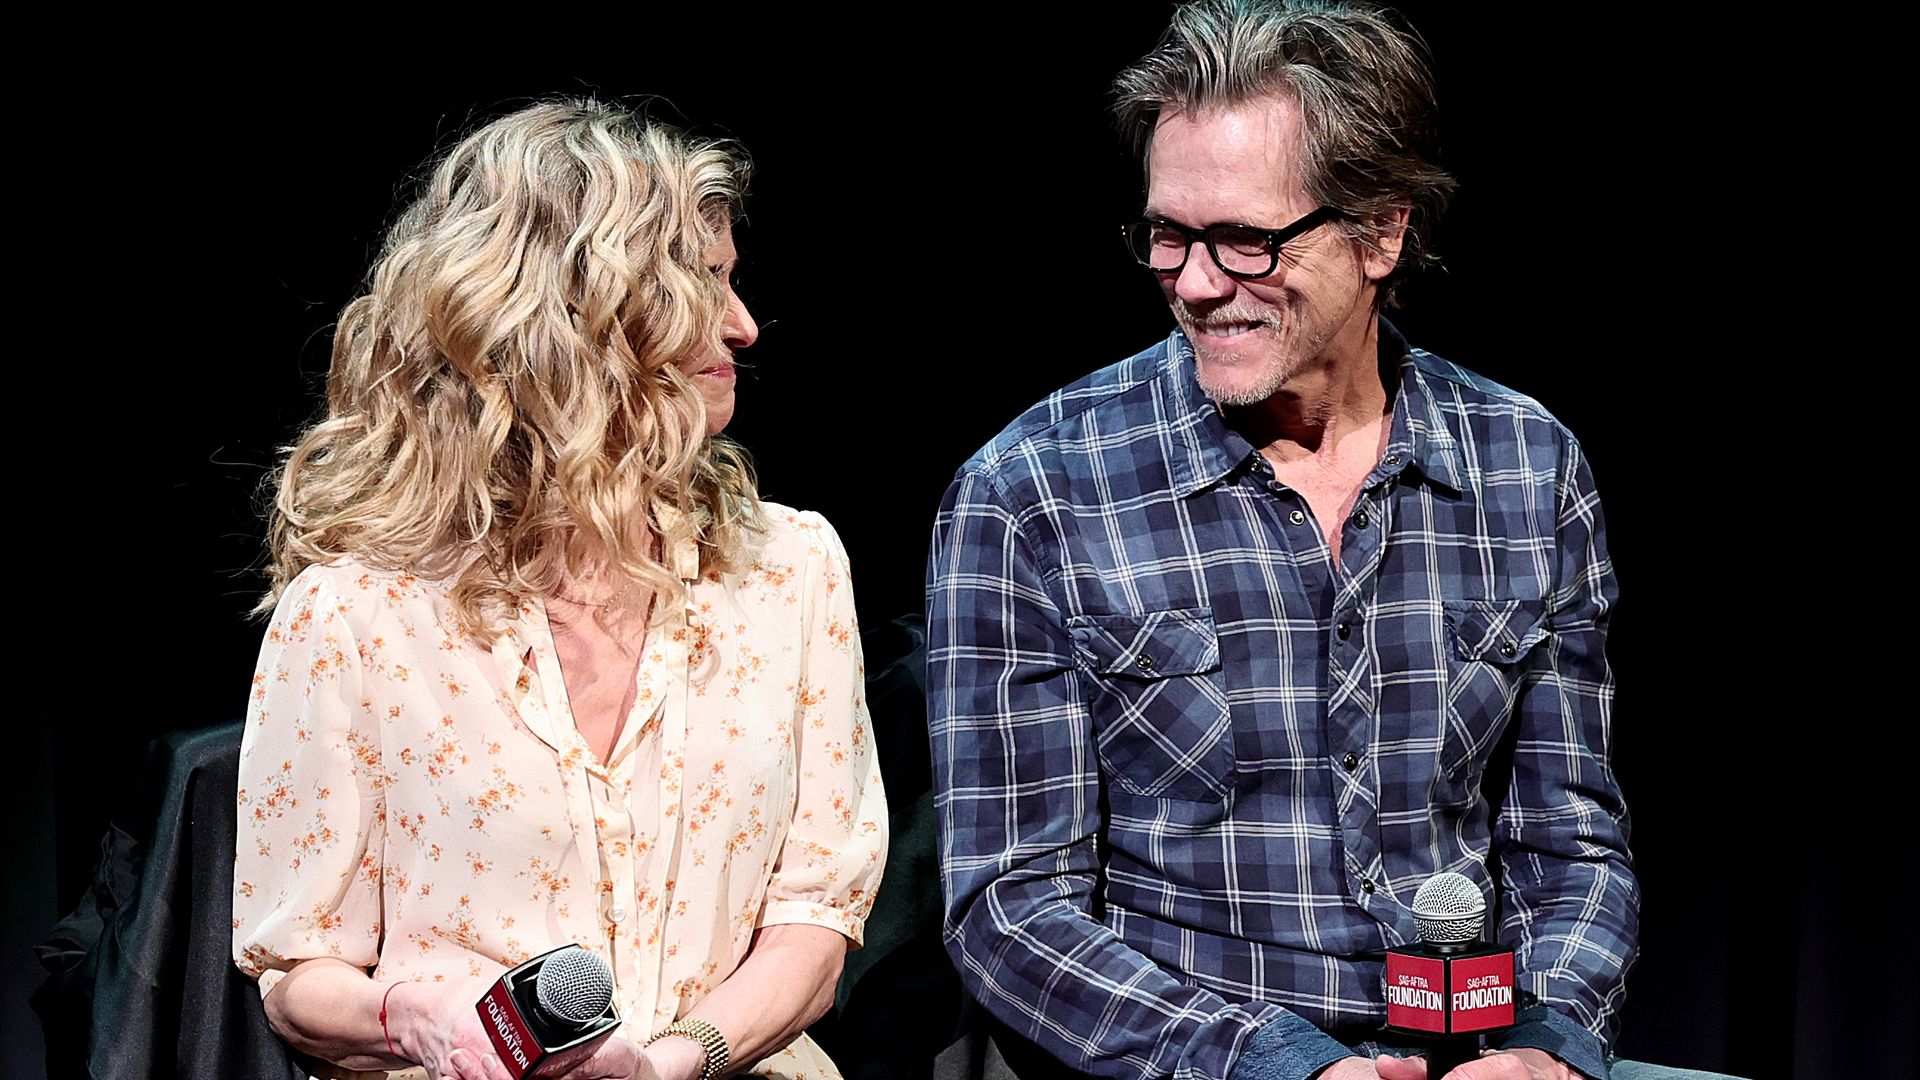 Kevin Bacon and Kyra Sedgwick smiling at each other while sat on stage being interviewed